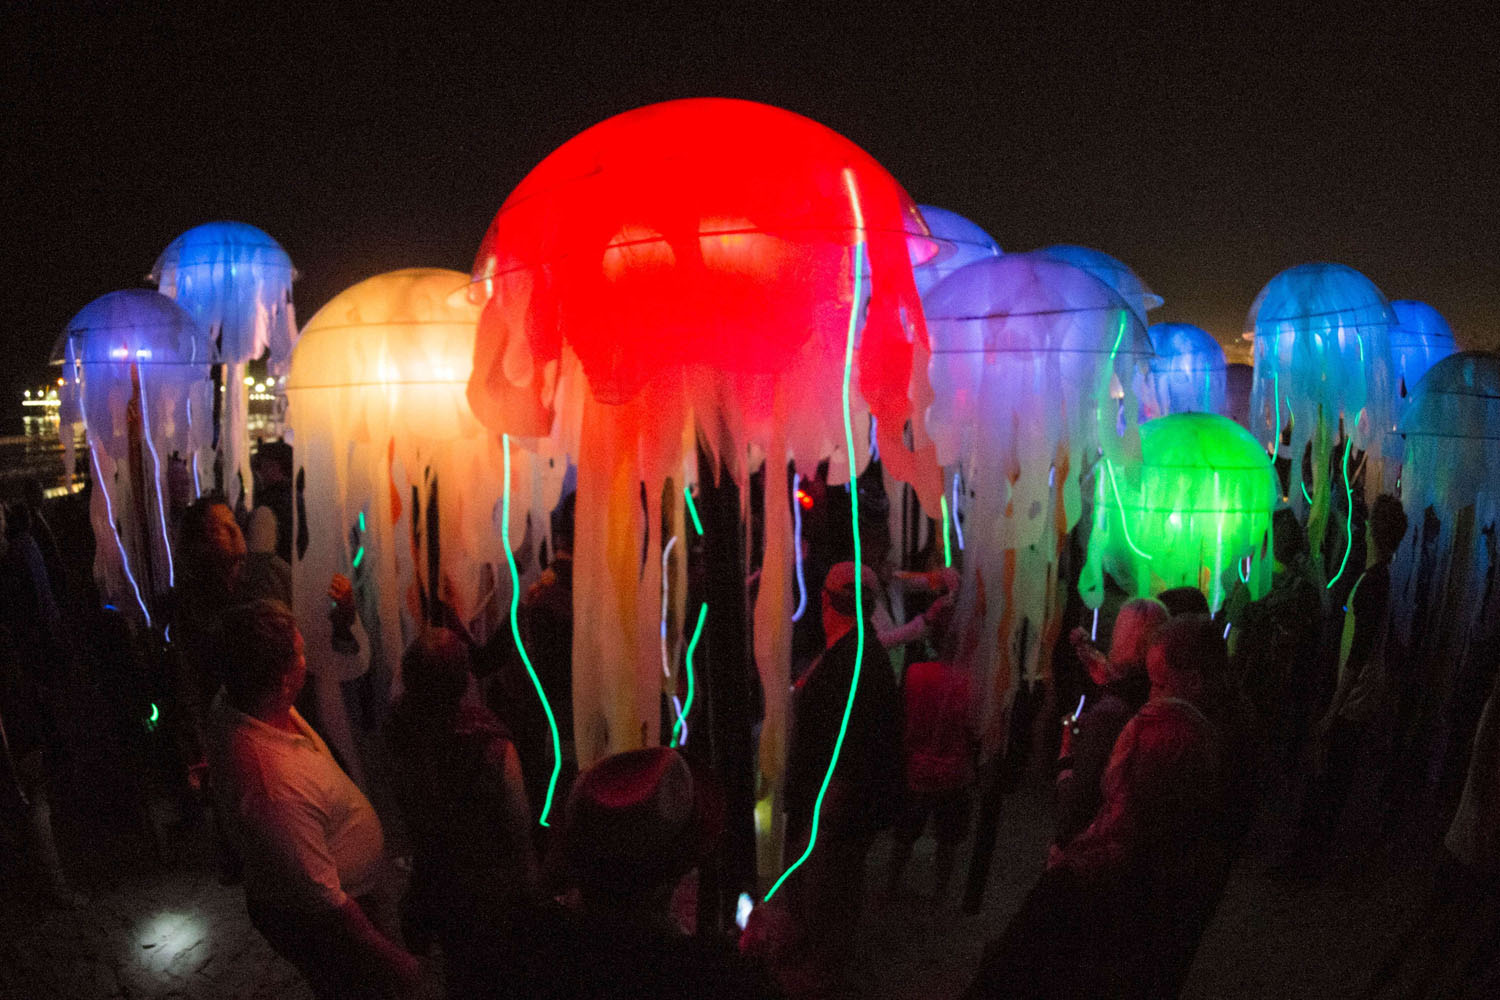 Sept. 29, 2013. Visitors explore Swarm of interactive jellyfish created by the group of artists Aphidoidea during Glow 2013 at the beach in Santa Monica, Calif.